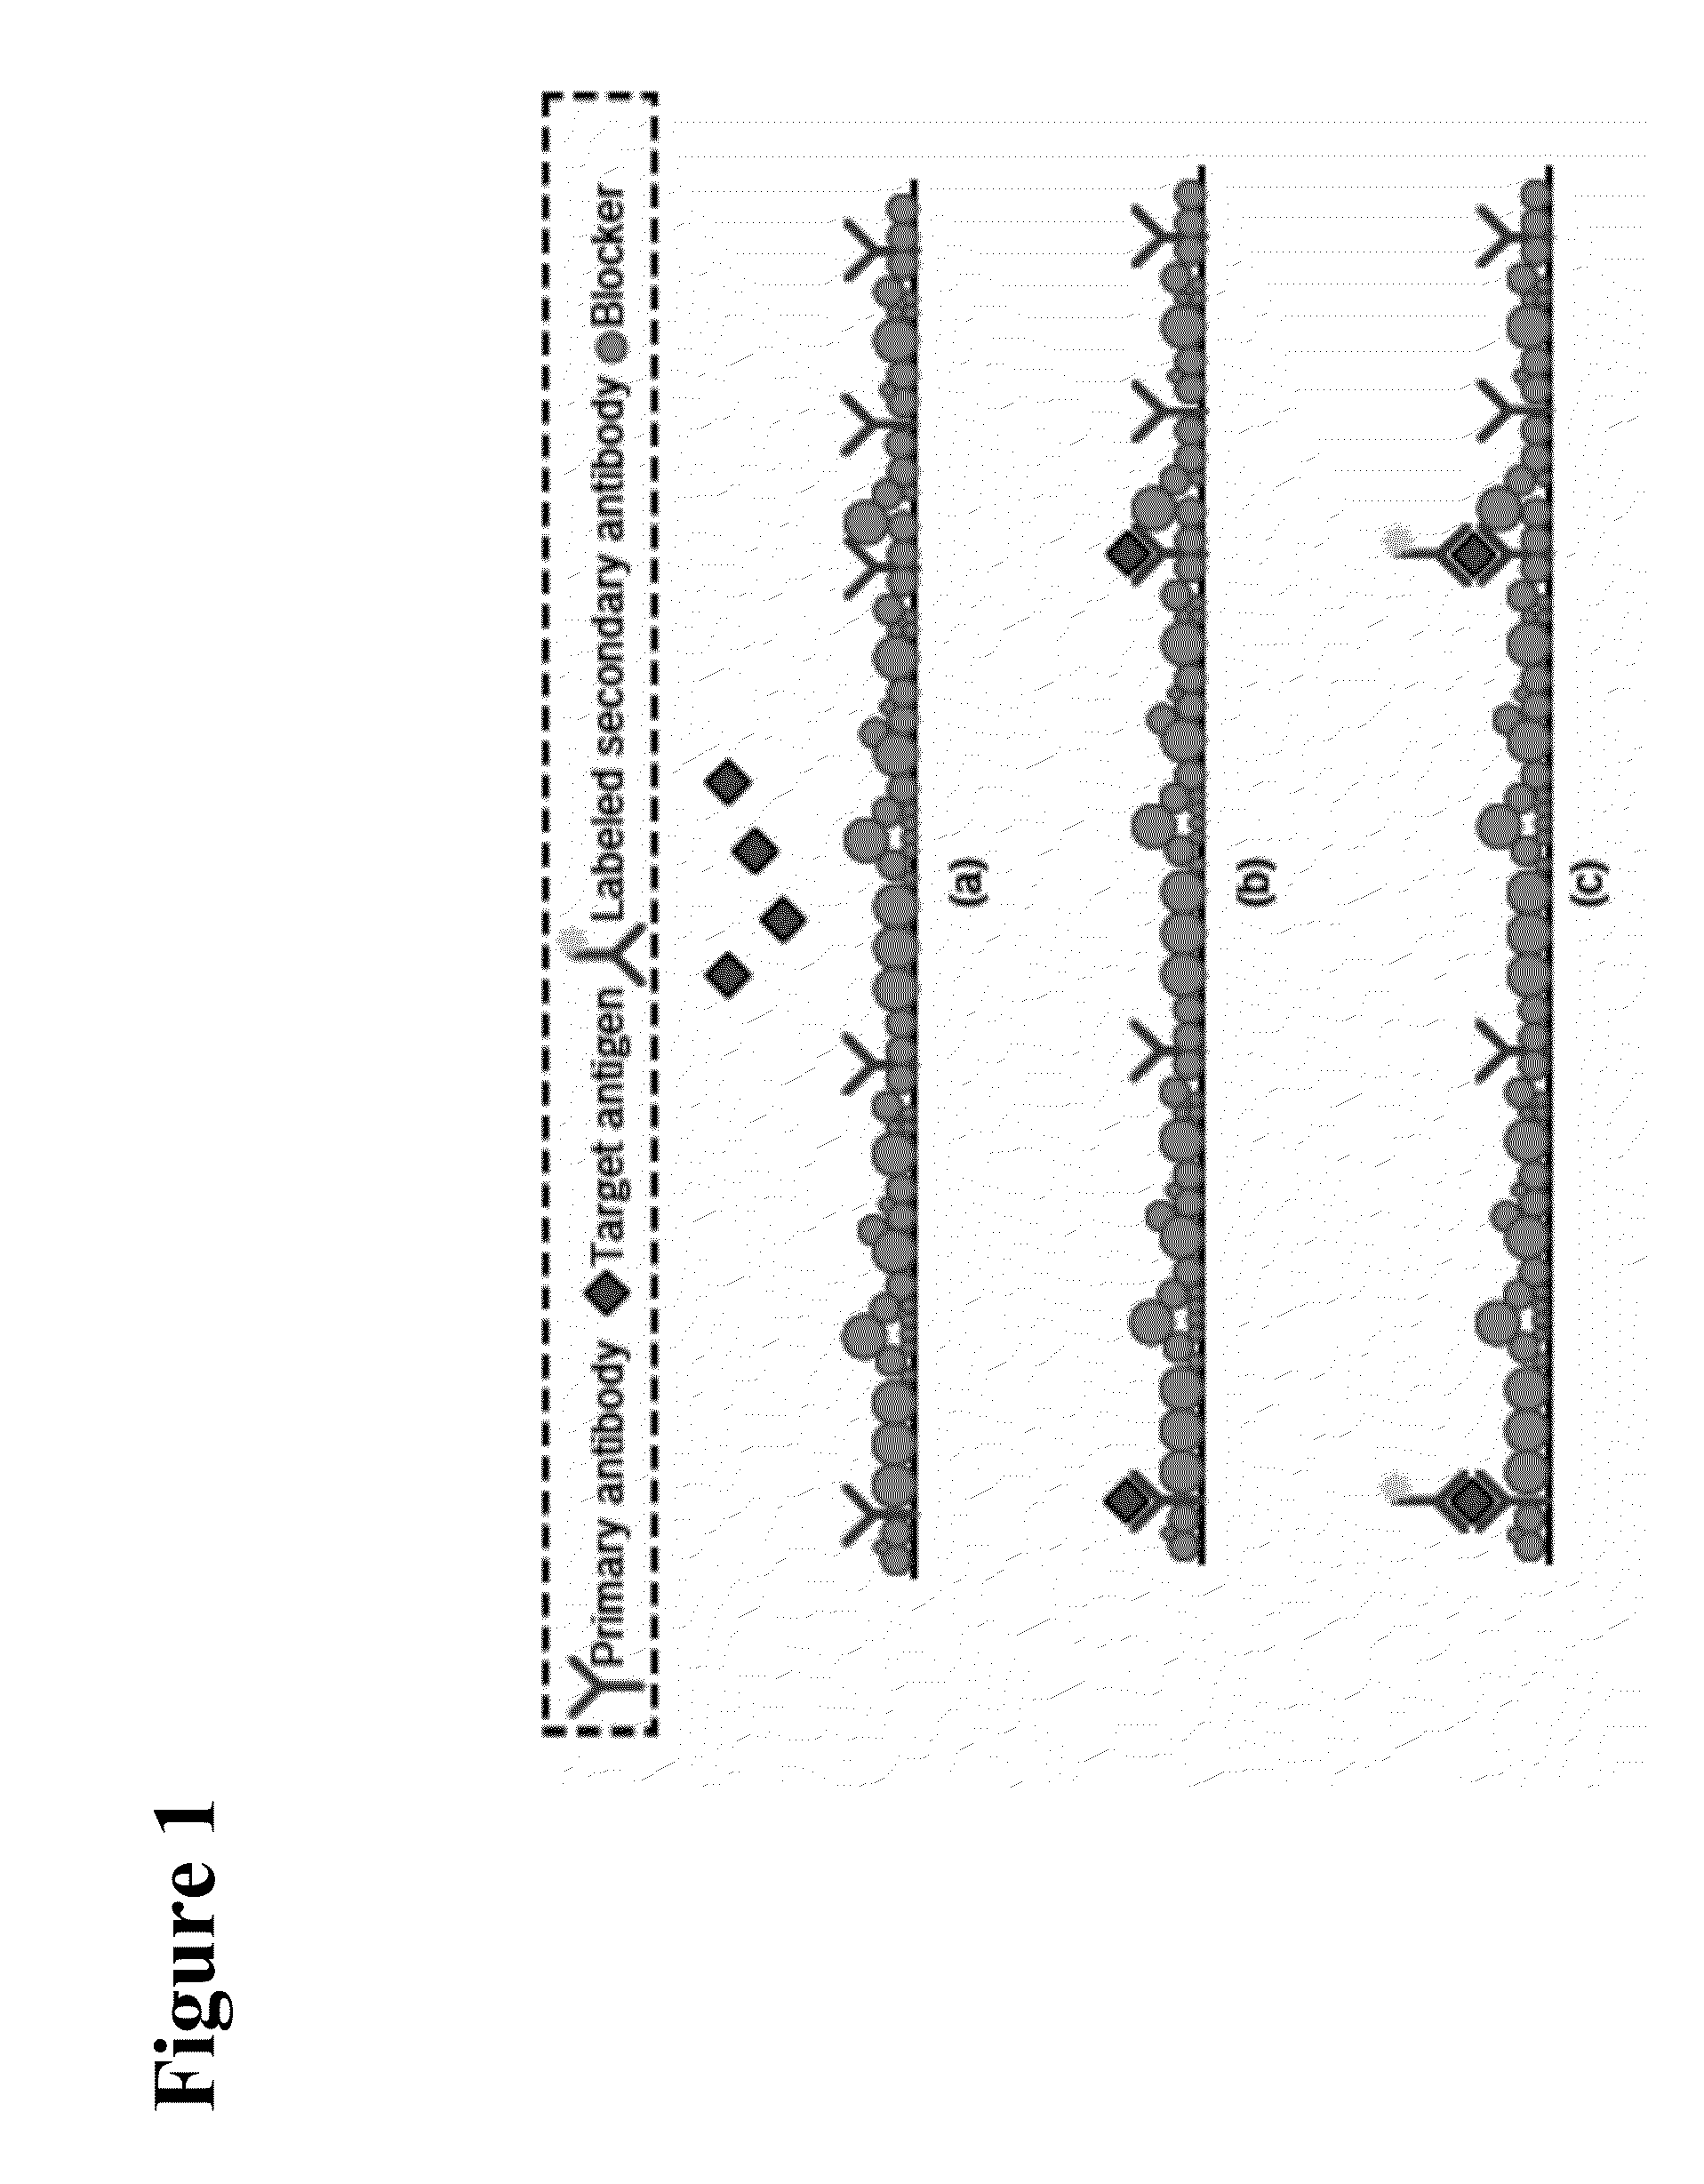 METHODS FOR GENERATING pH/IONIC CONCENTRATION GRADIENT NEAR ELECTRODE SURFACES FOR MODULATING BIOMOLECULAR INTERACTIONS, AND BUBBLE DETECTION USING ELECTRODES